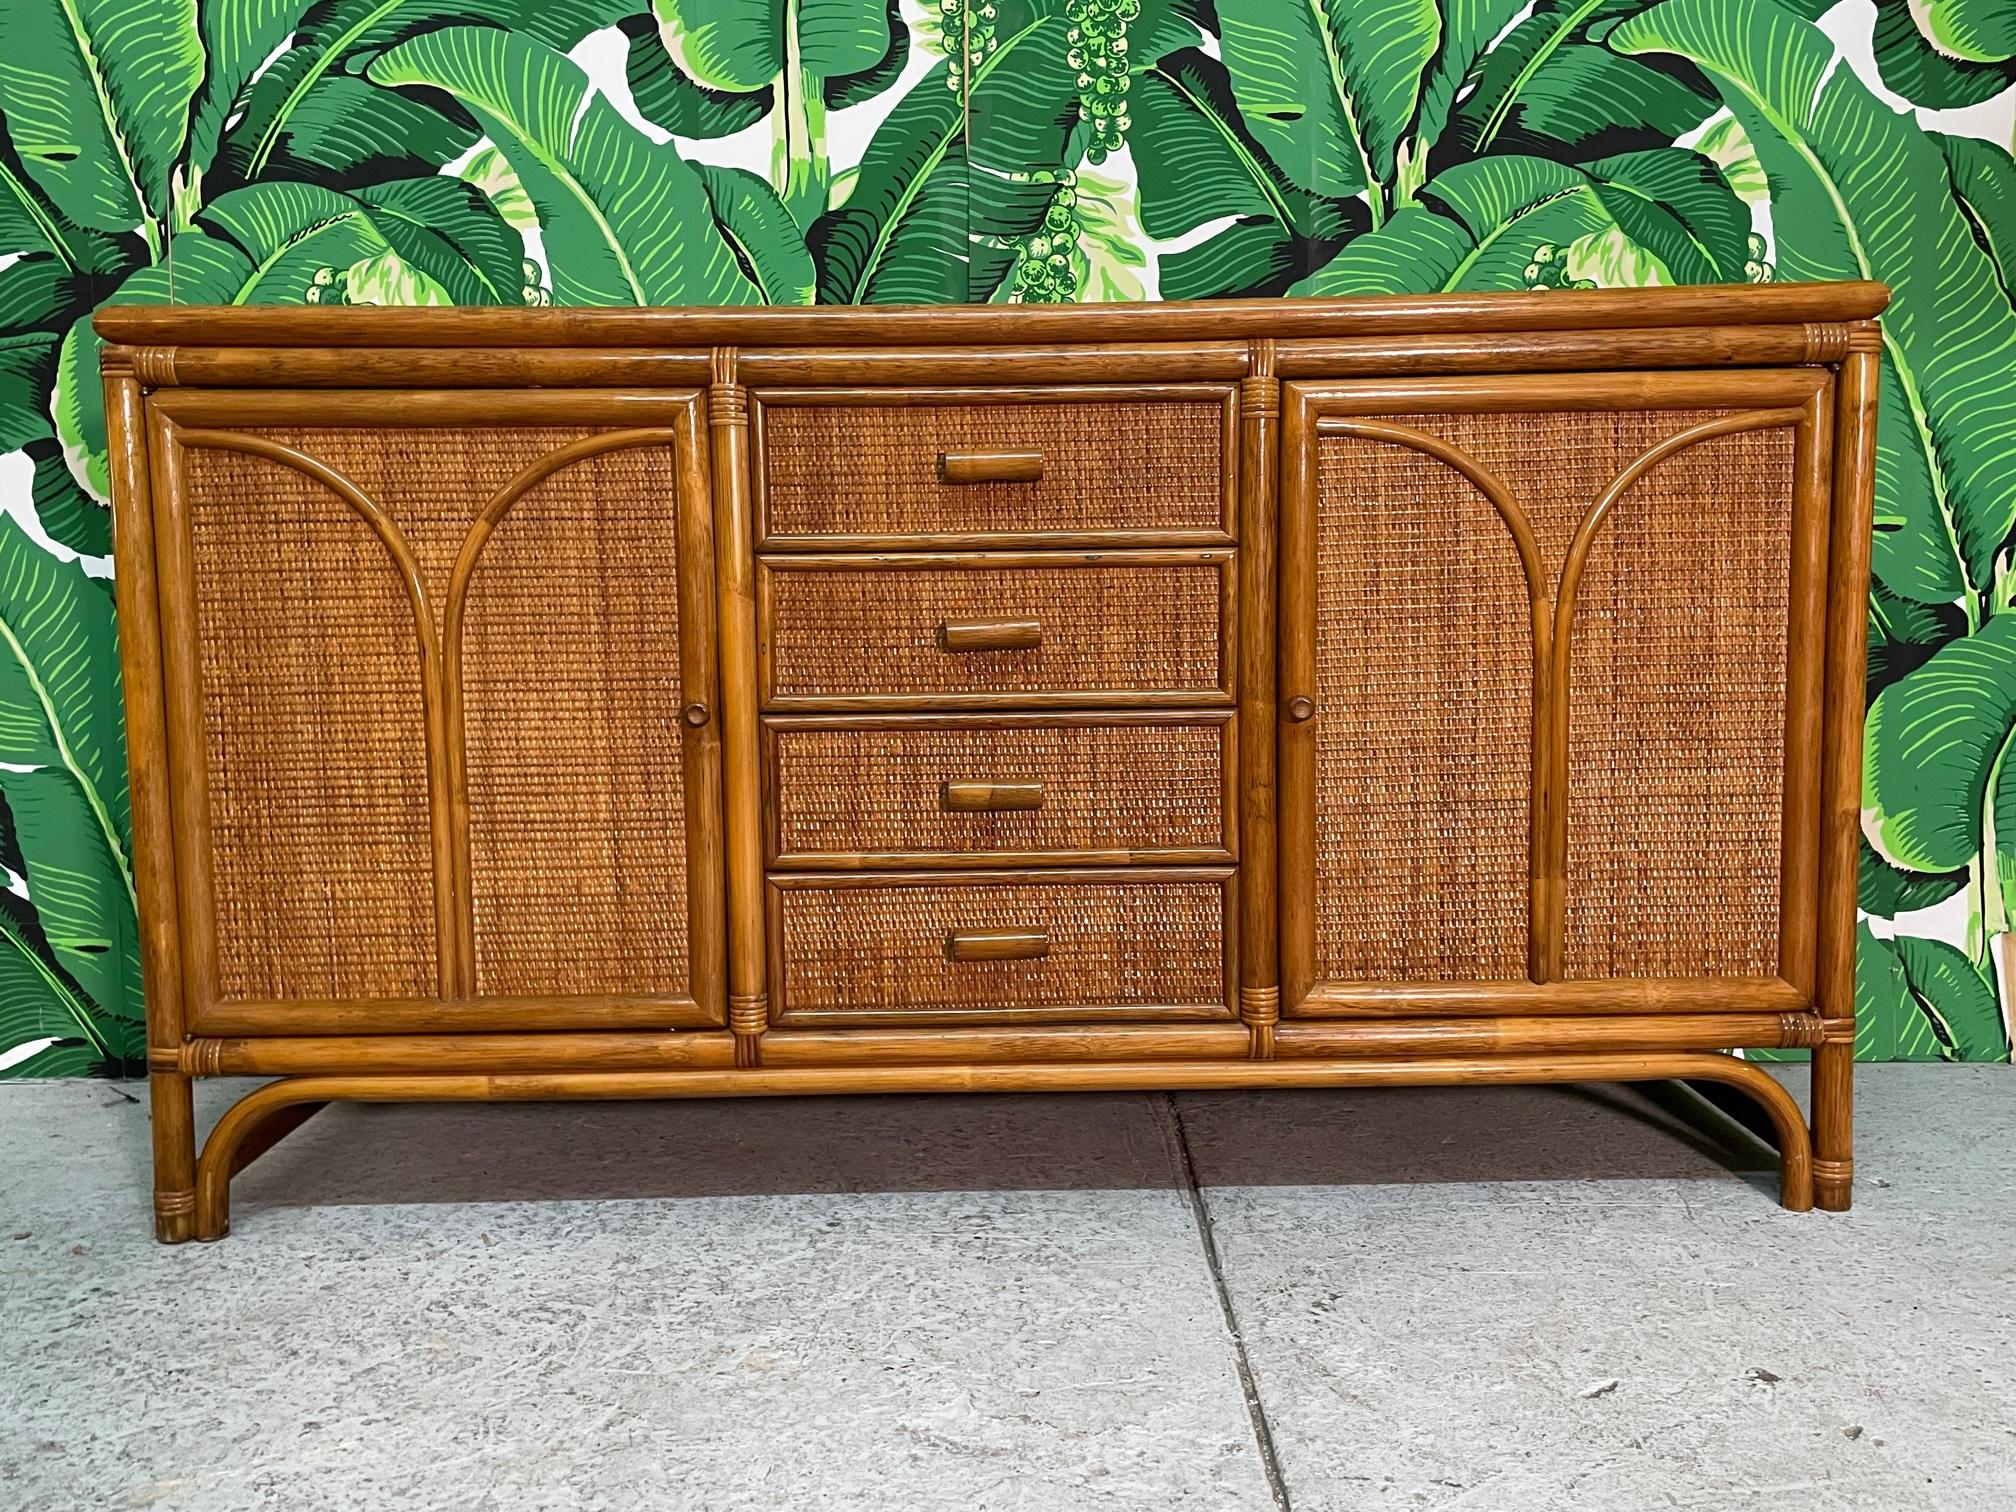 Rattan buffet or credenza features a full veneer of woven wicker and pencil reed detailing. Recently restored and in excellent condition. We also have a matching pair of etageres available.
 